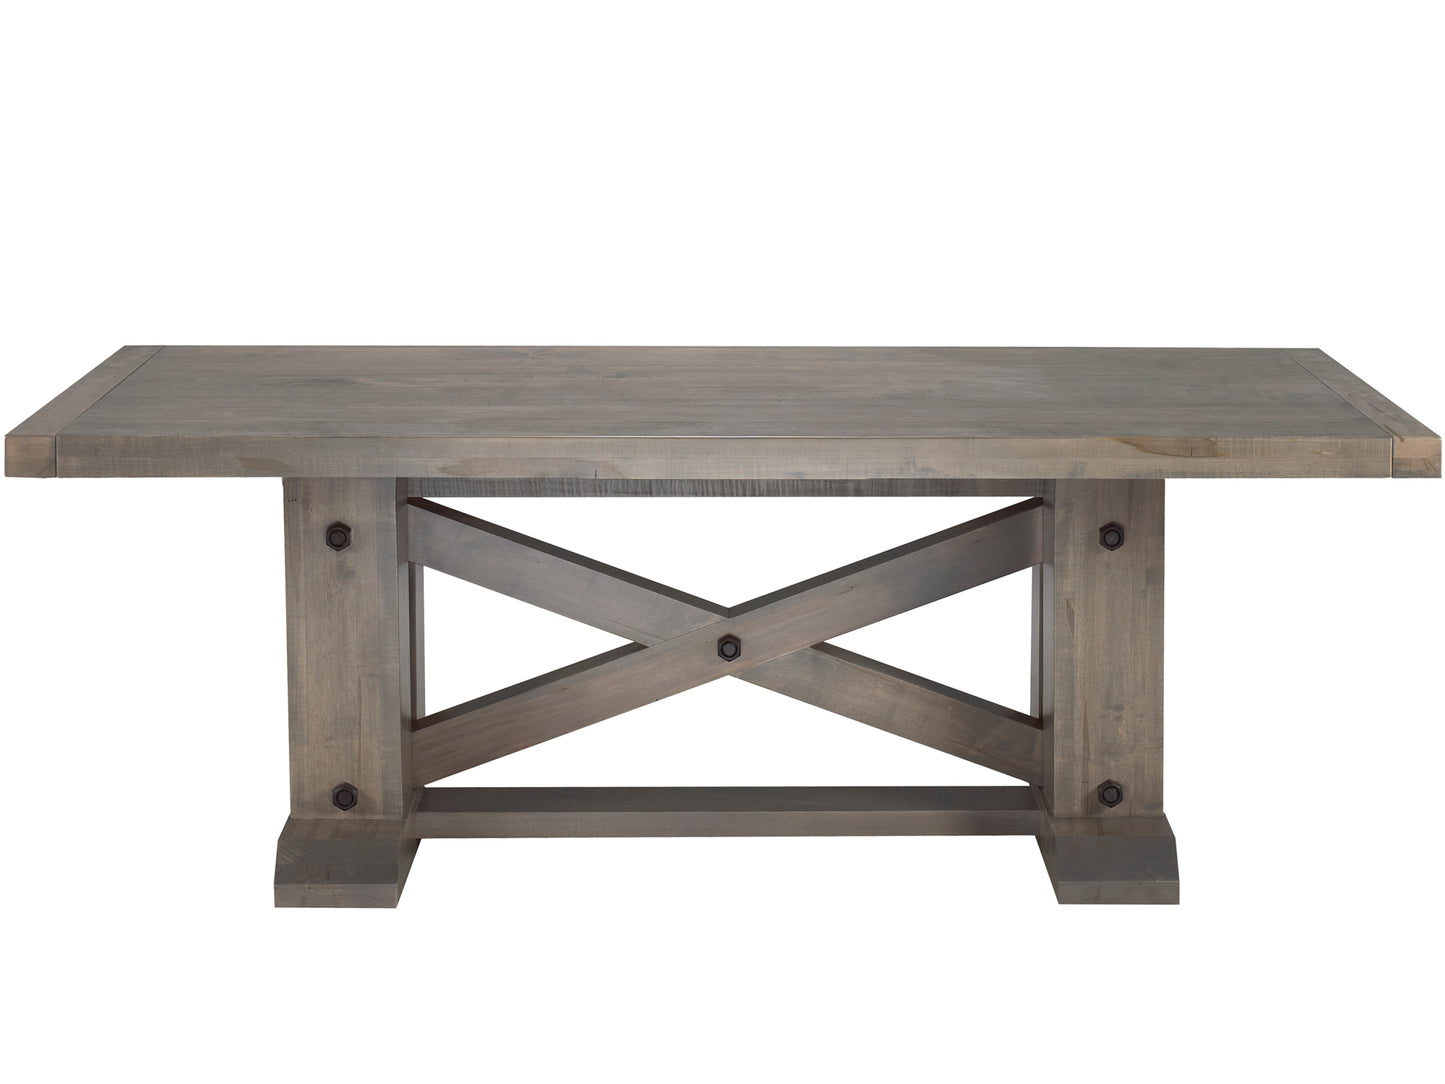 Acton Central Dining Table, made to order, custom furniture, canadian made.